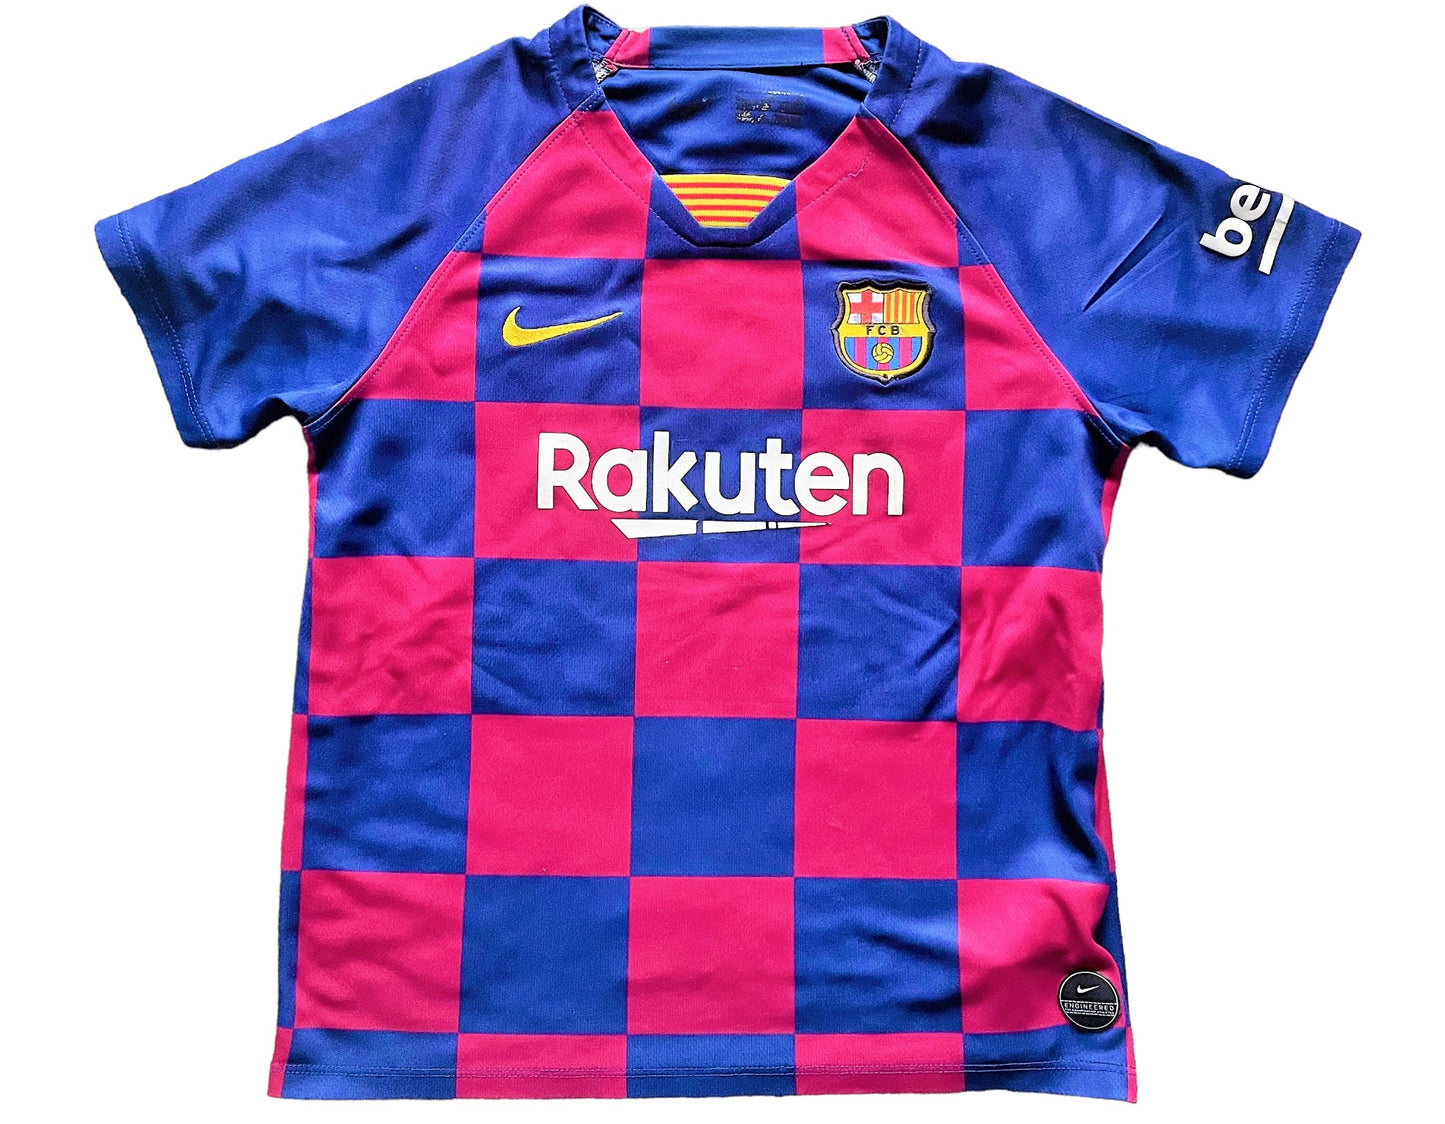 Barcelona 2019 Home Shirt (average) size worn Childs 4 to 5 year old?